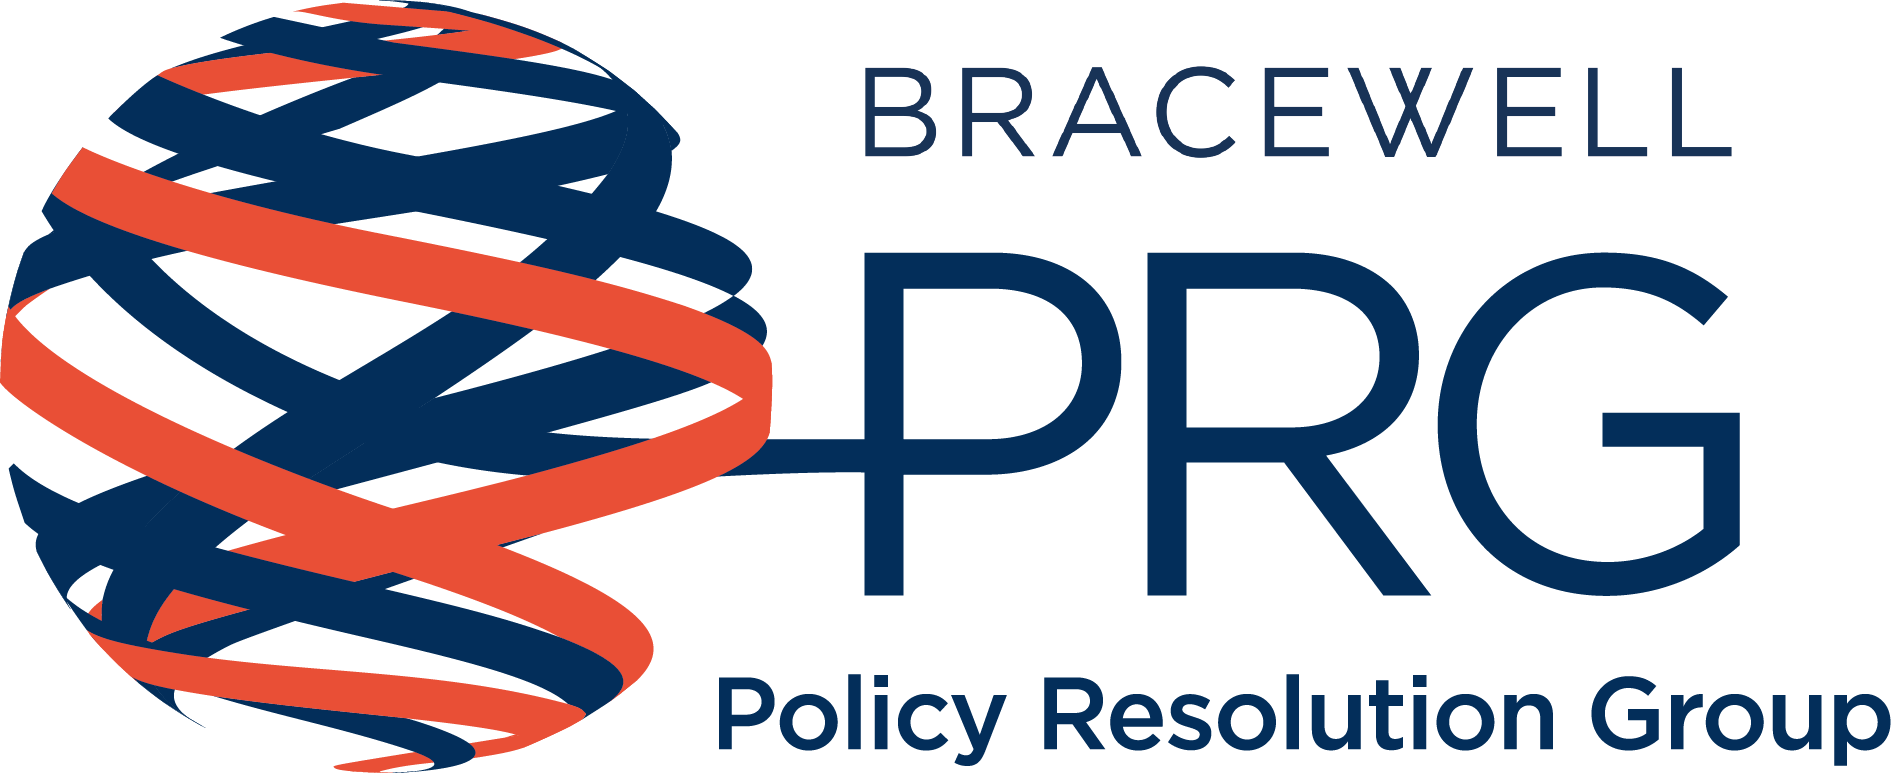 Bracewell Policy Resolution Group